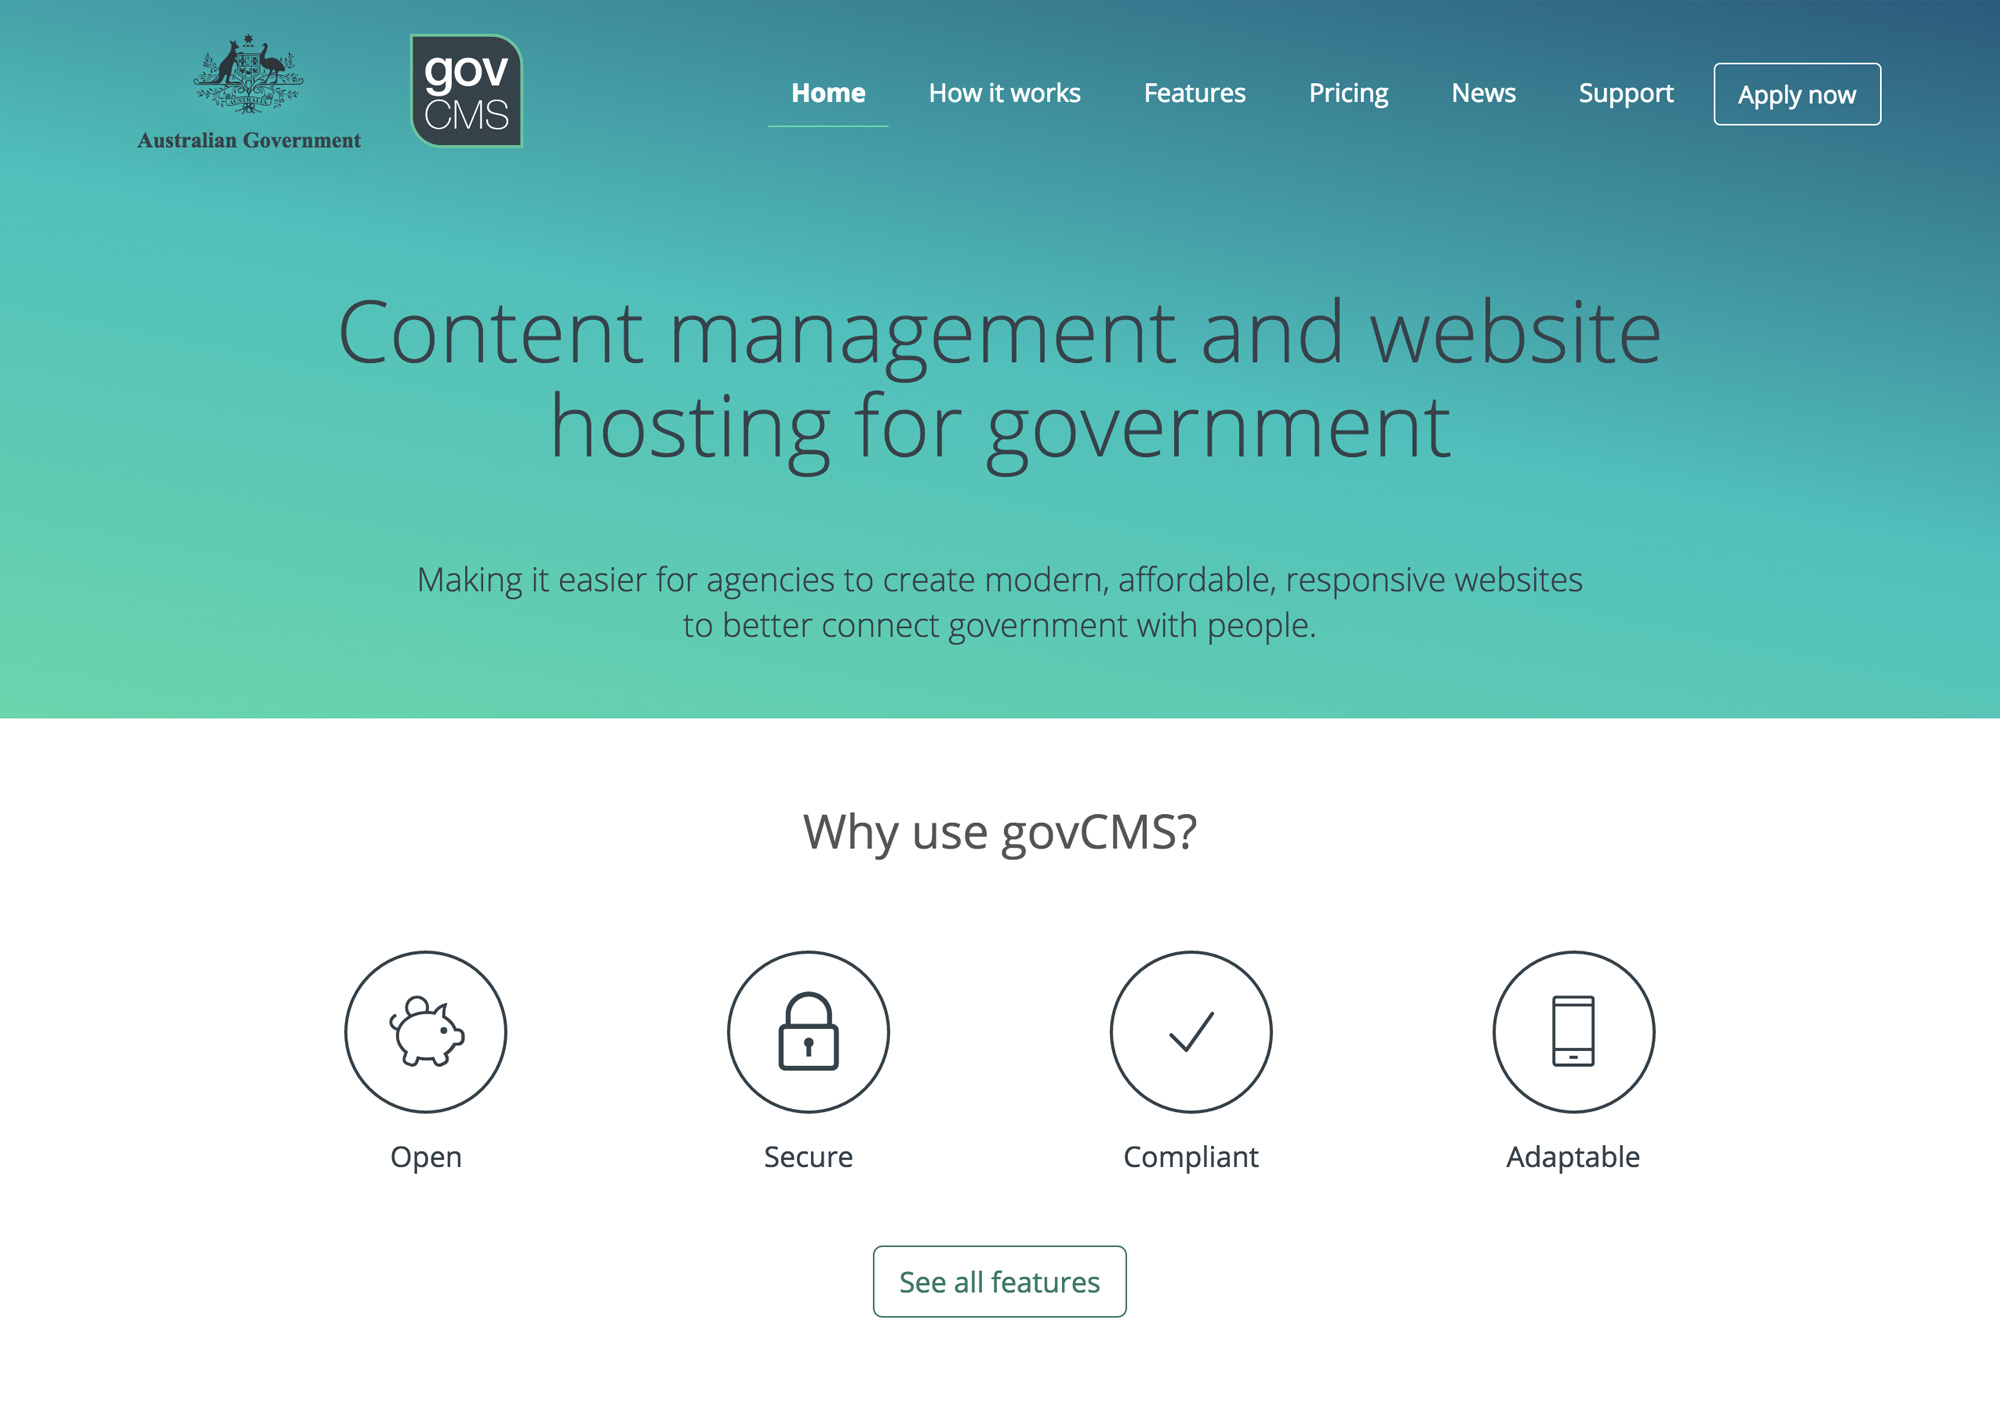 GovCMS homepage